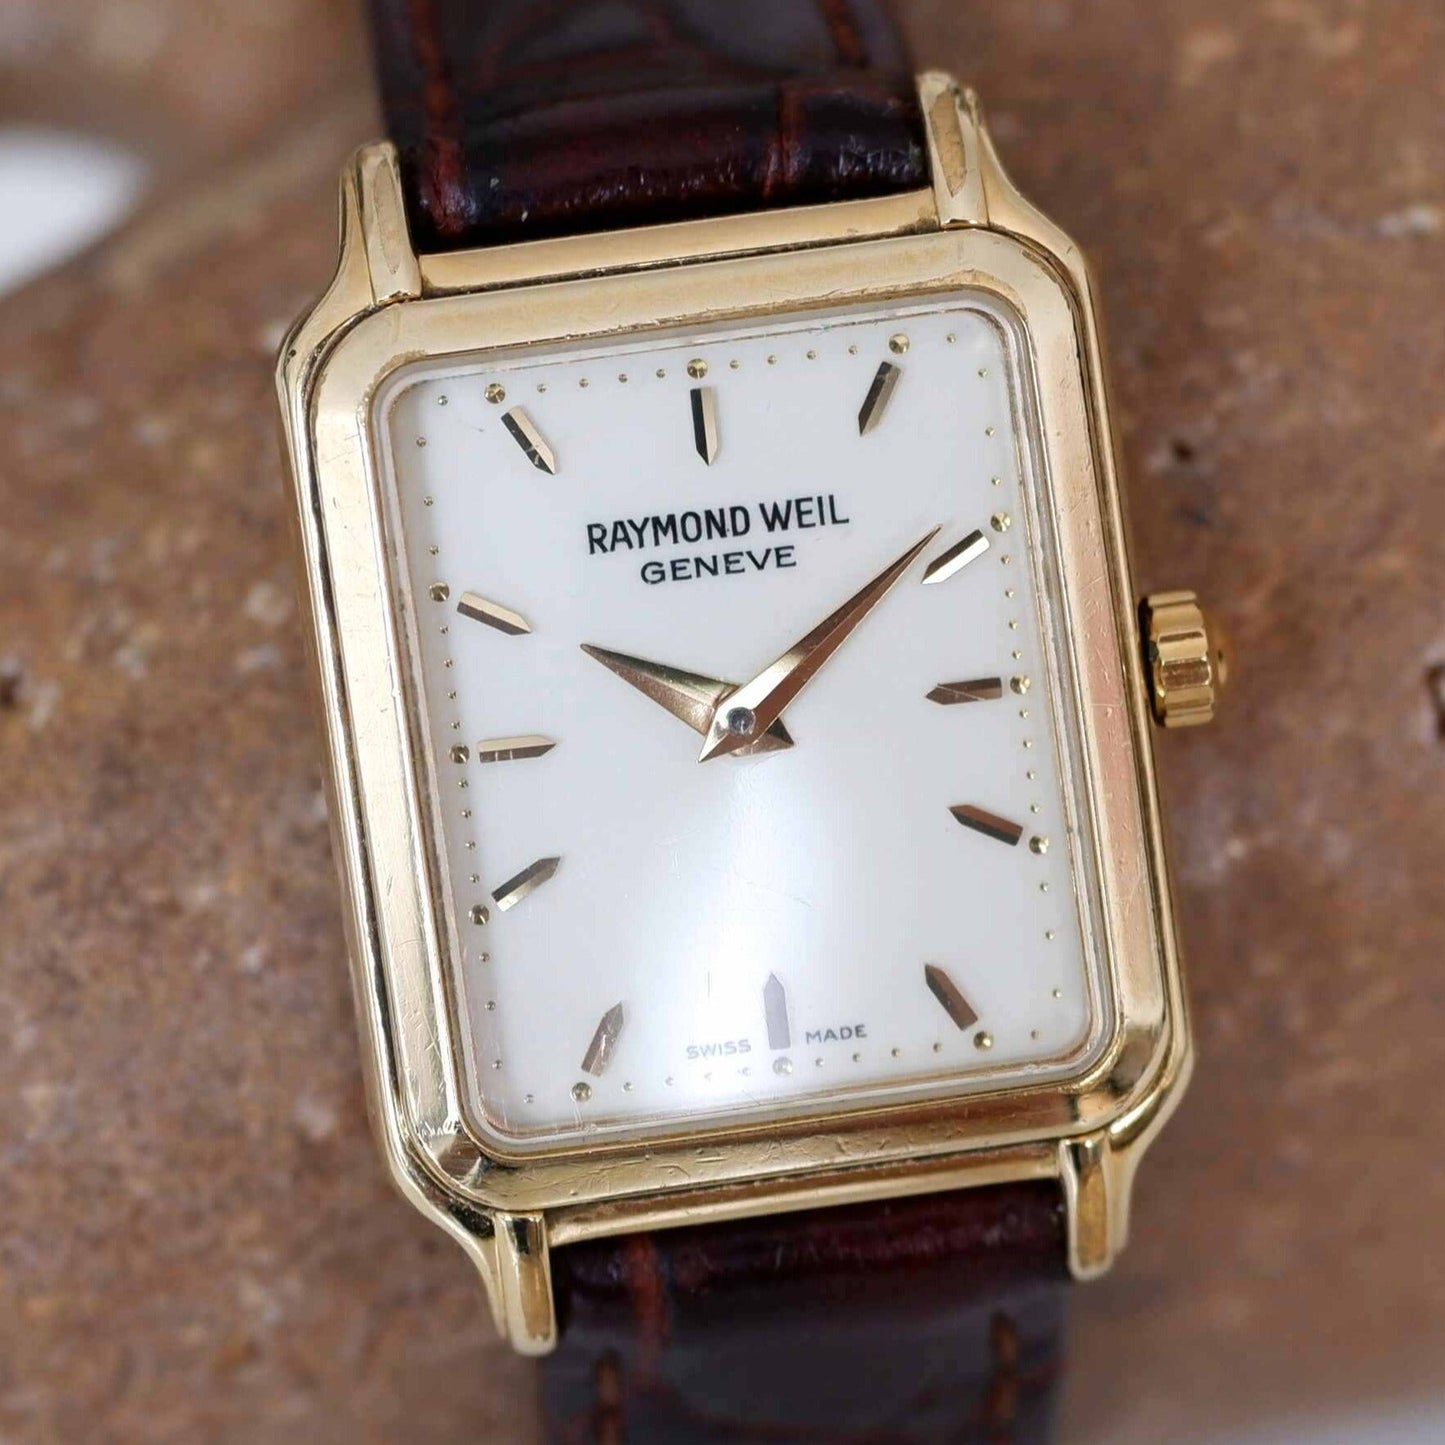 Raymond Weil Vintage Ladies Watch: 90s Golden Rectangular Style with White Dial | First Front Side